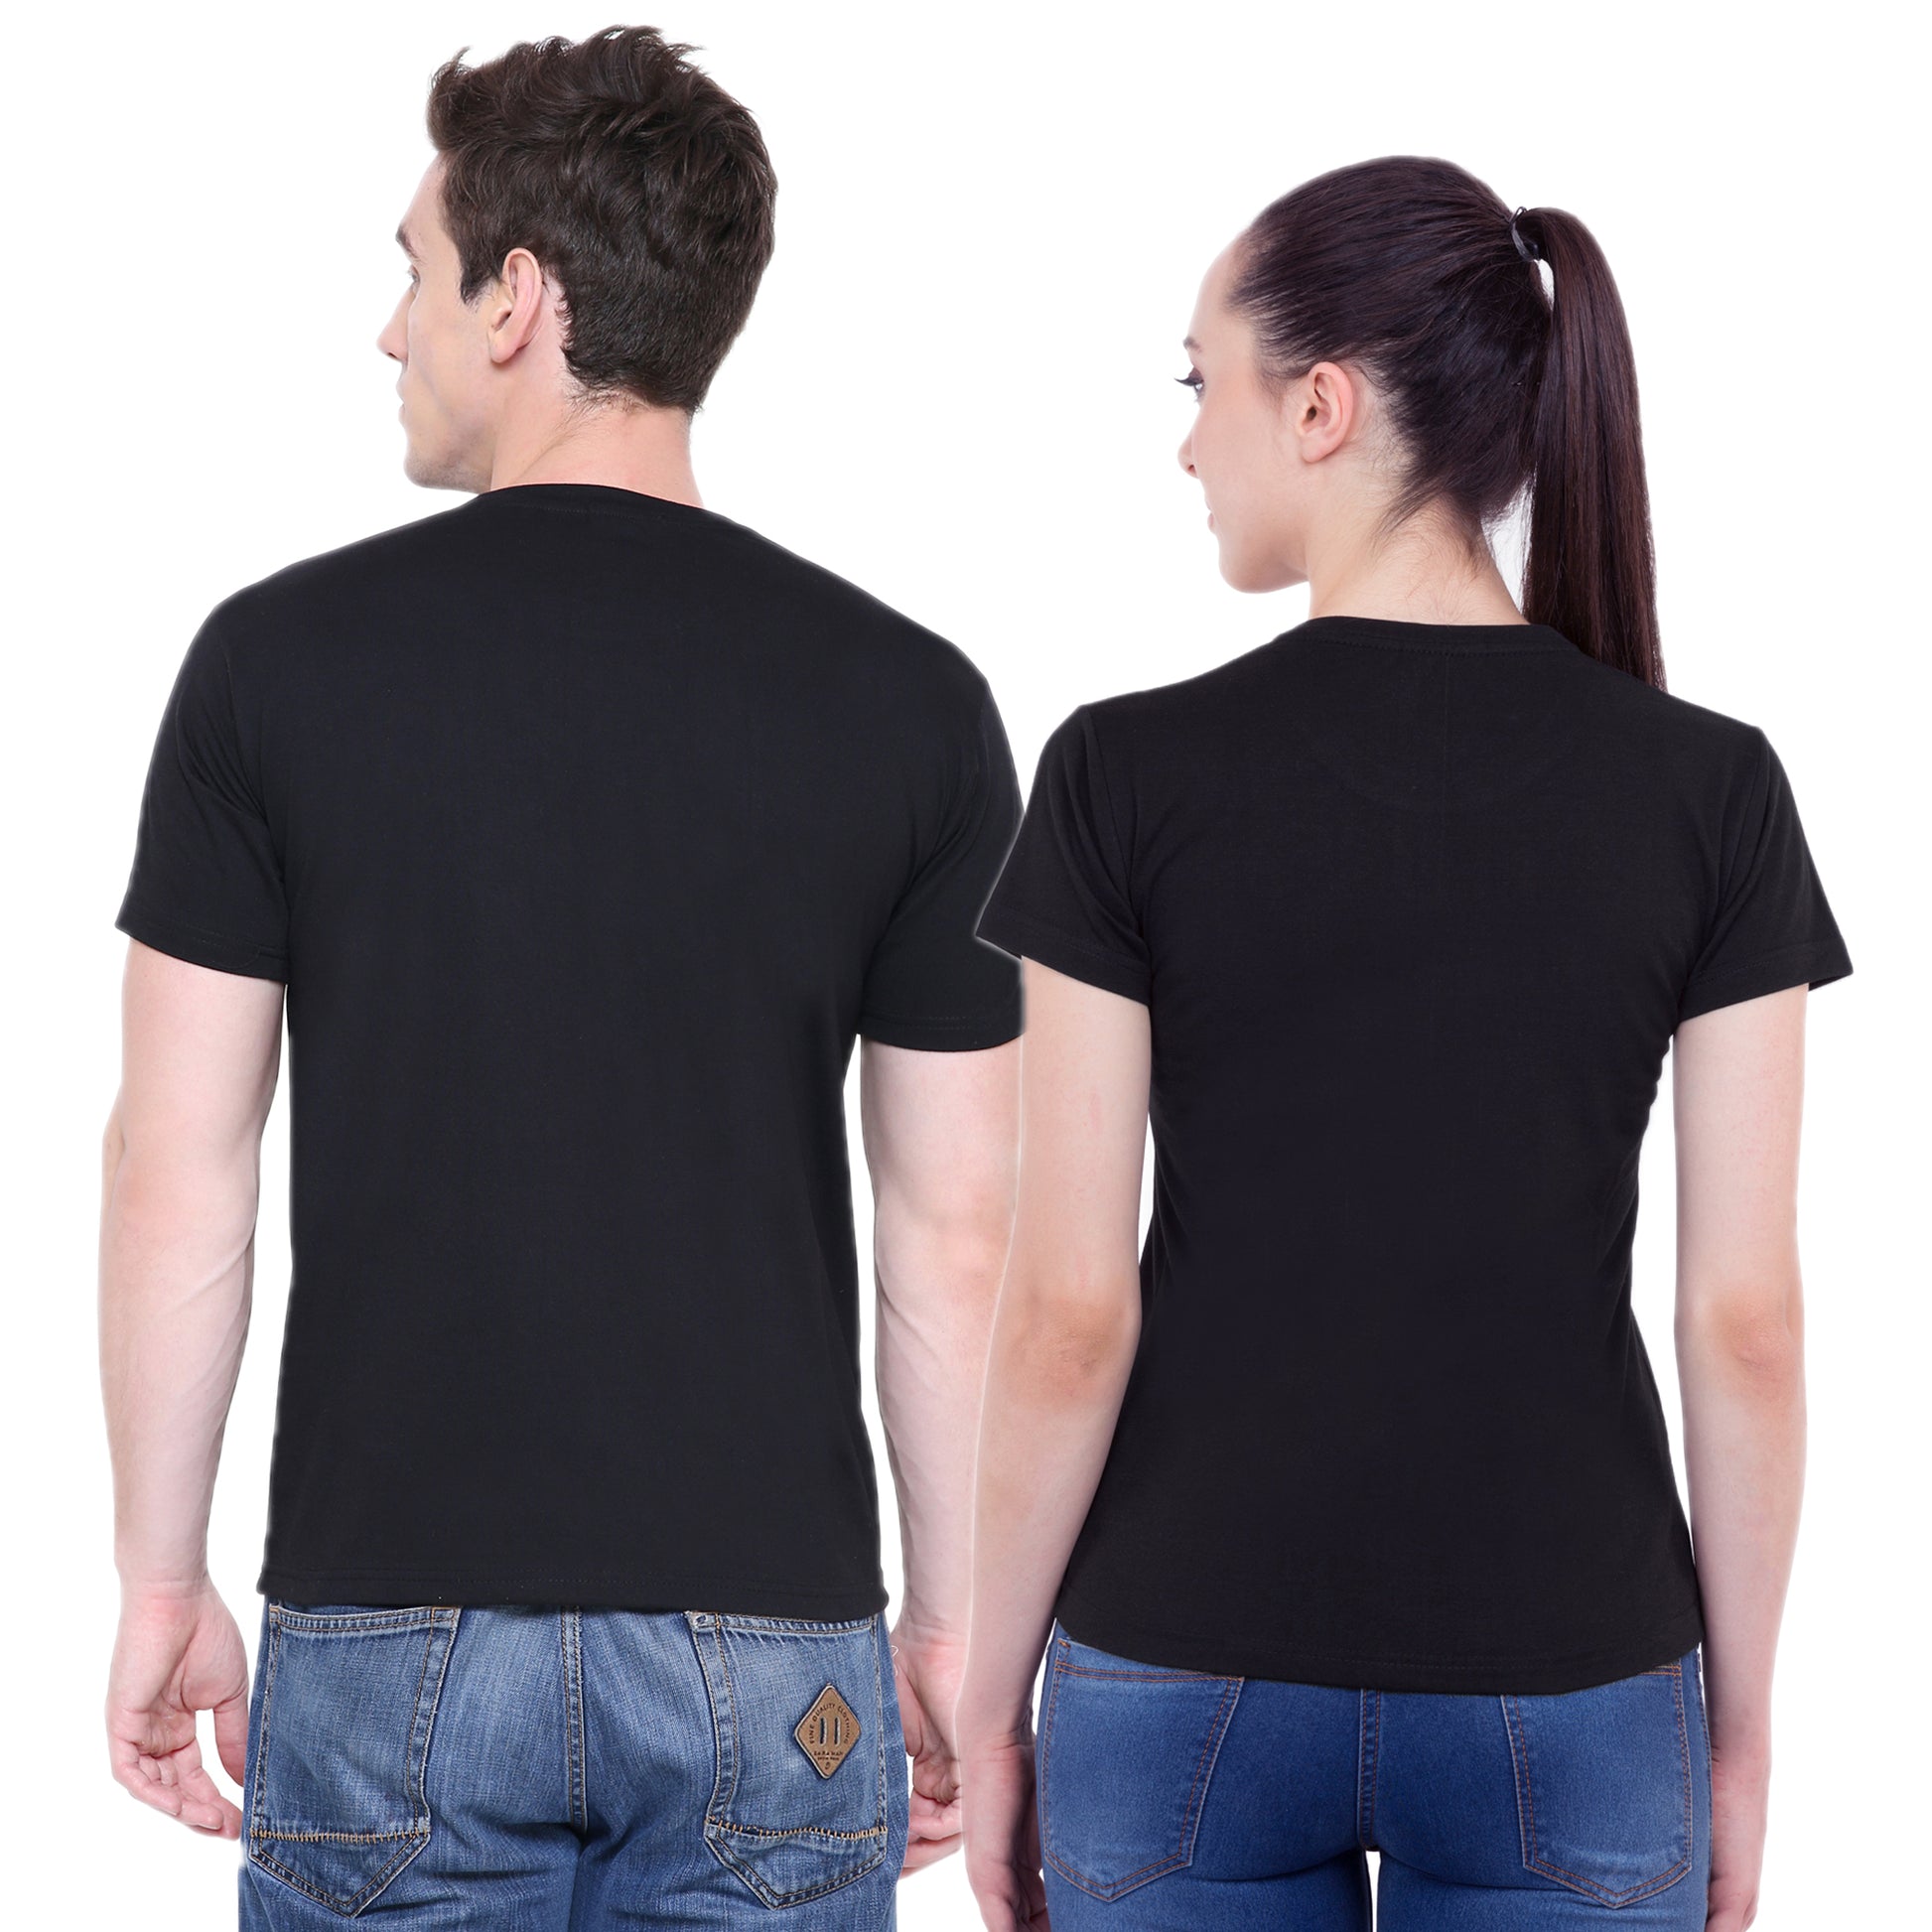 Player 3 coming soon Maternity Dress|Maternity Couple T shirts- Black